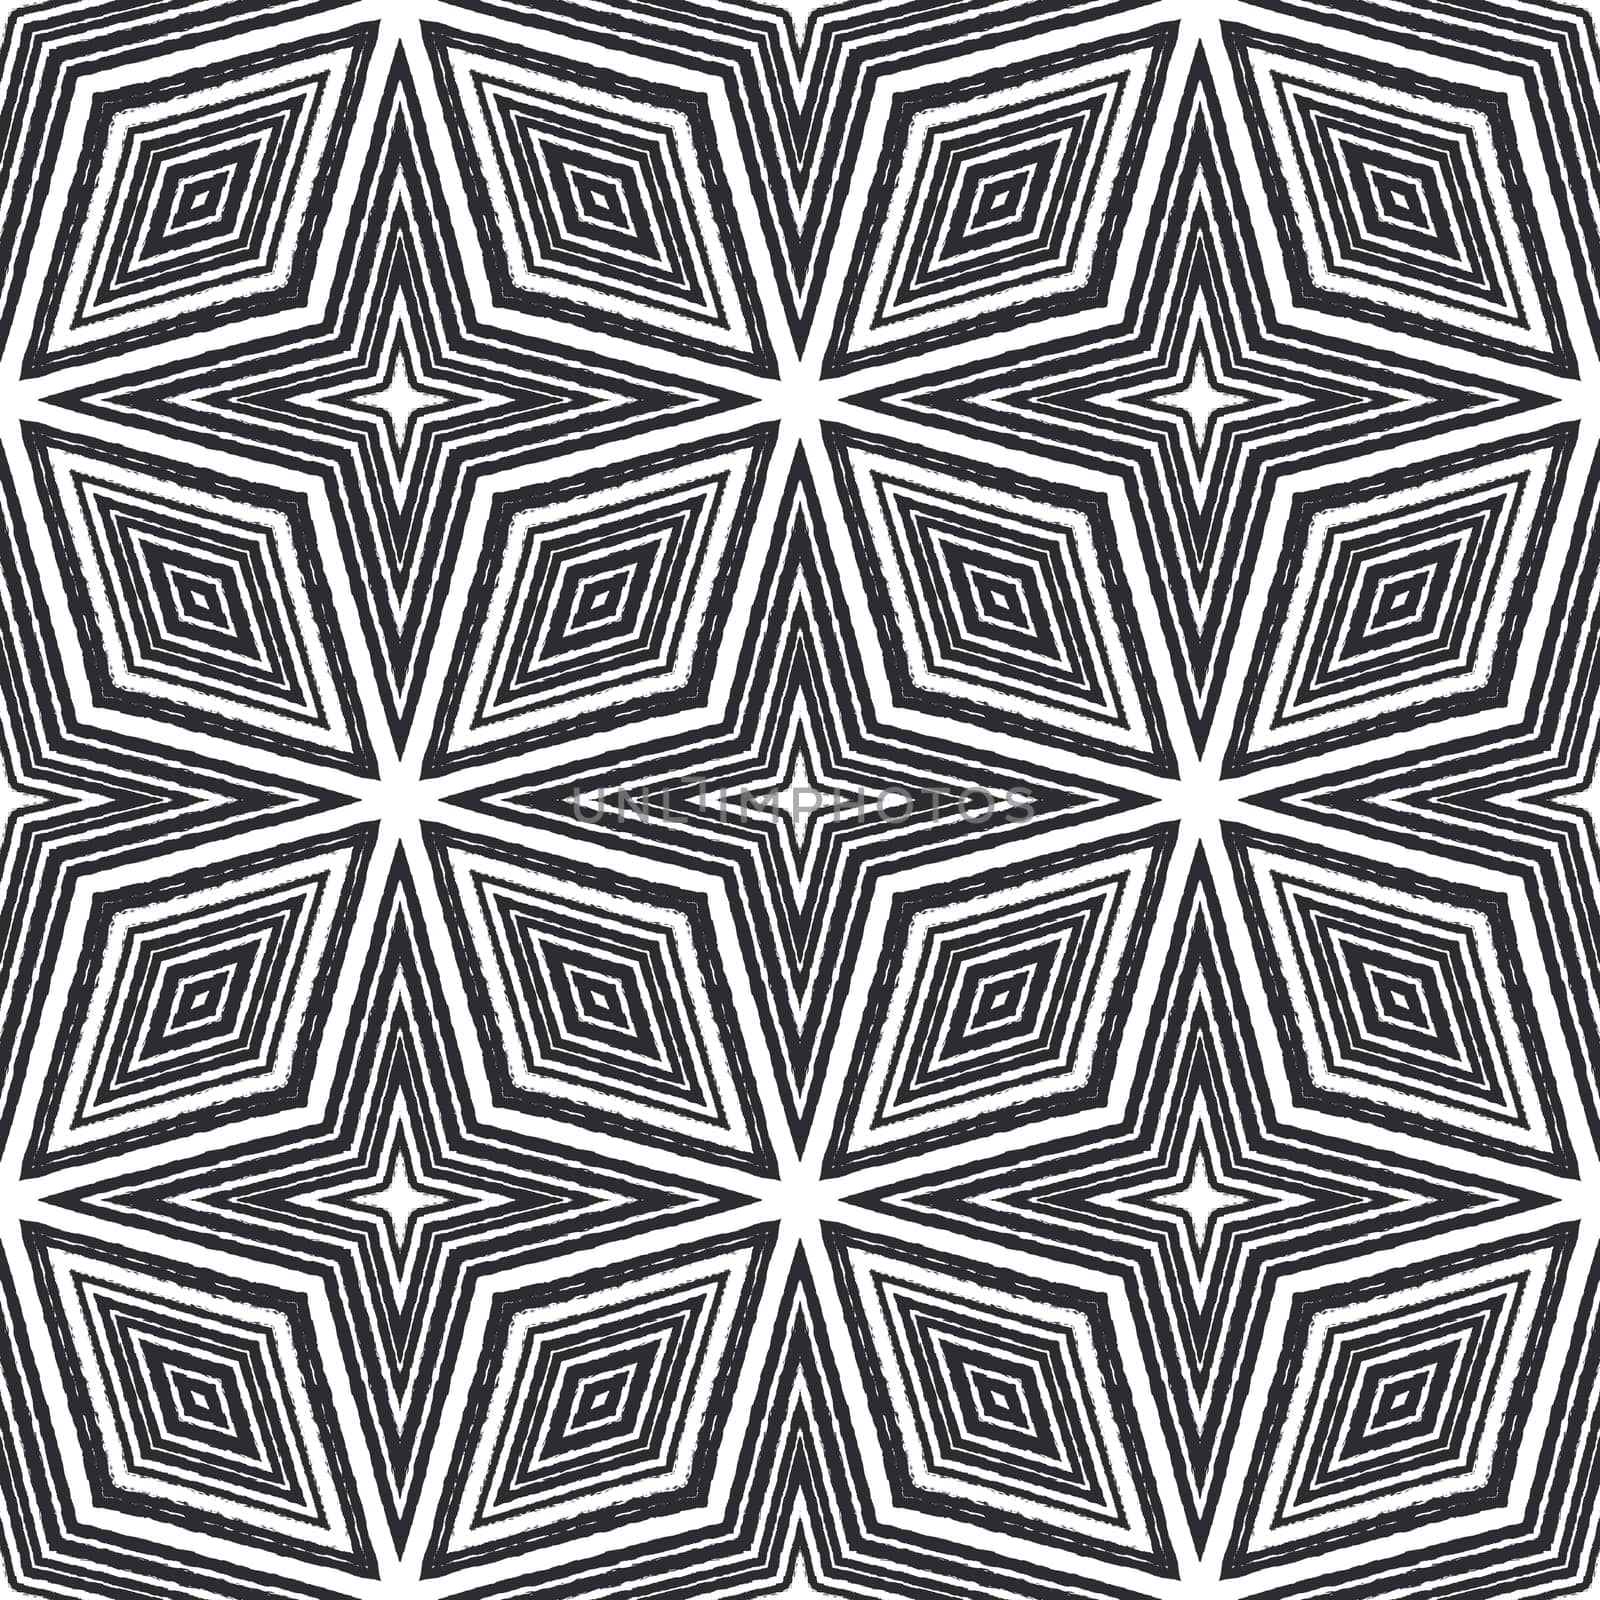 Striped hand drawn pattern. Black symmetrical kaleidoscope background. Repeating striped hand drawn tile. Textile ready energetic print, swimwear fabric, wallpaper, wrapping.